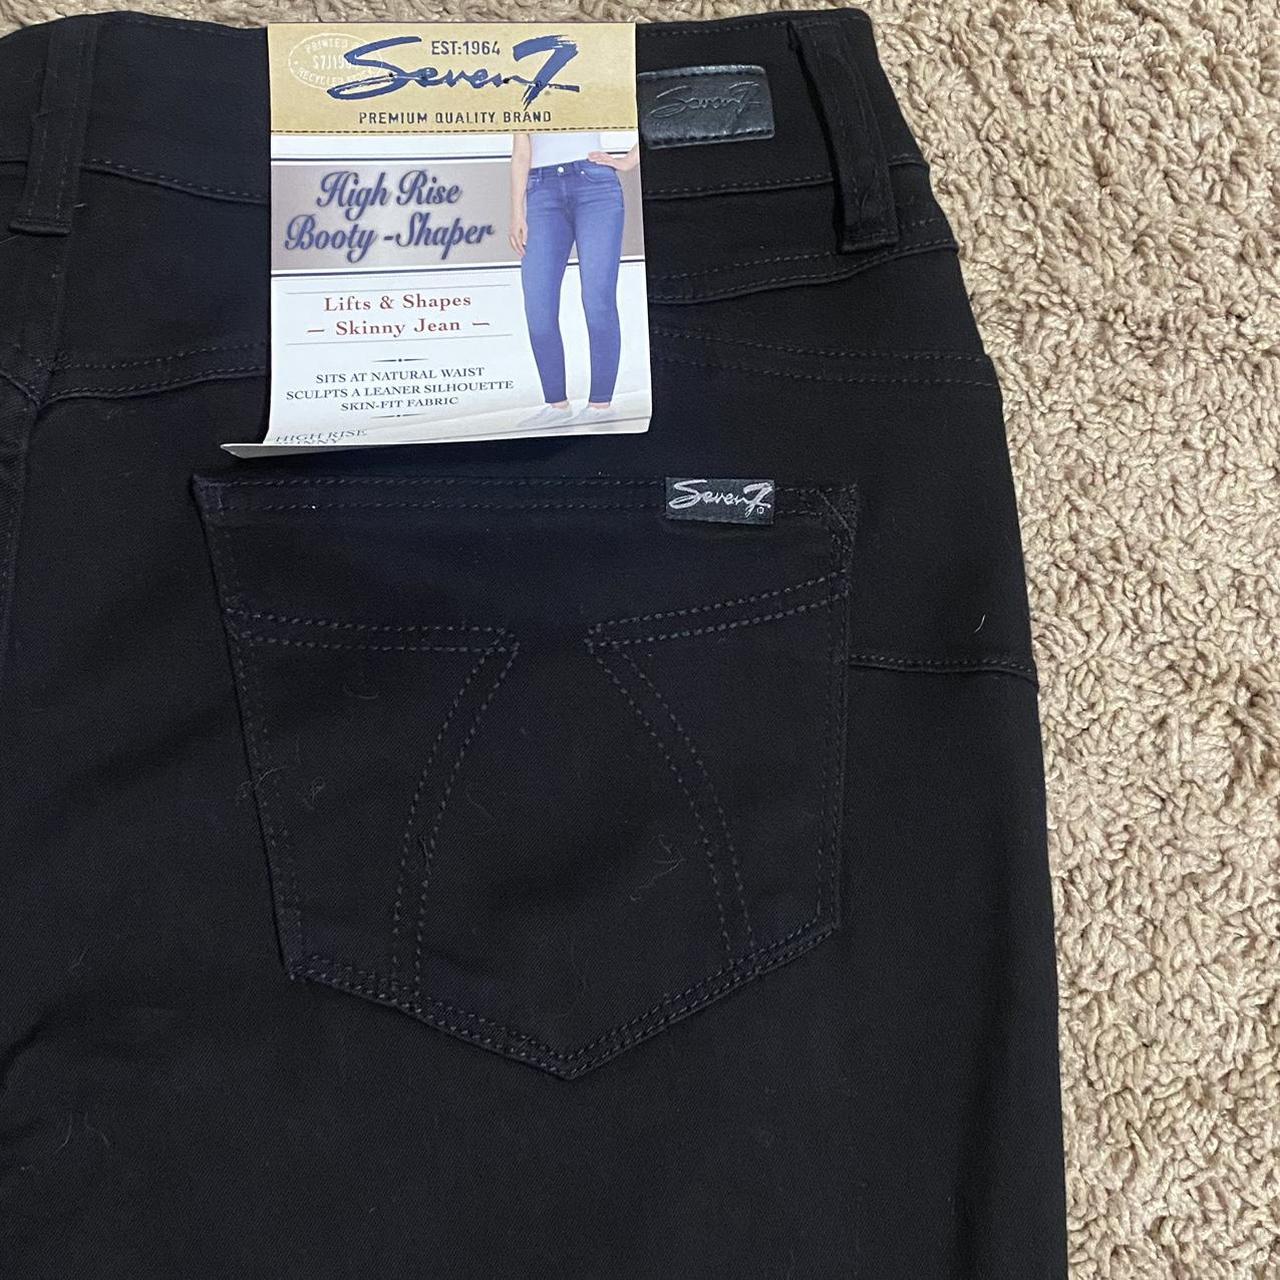 High Rise Booty Shaper Skinny Jean at Seven7 Jeans